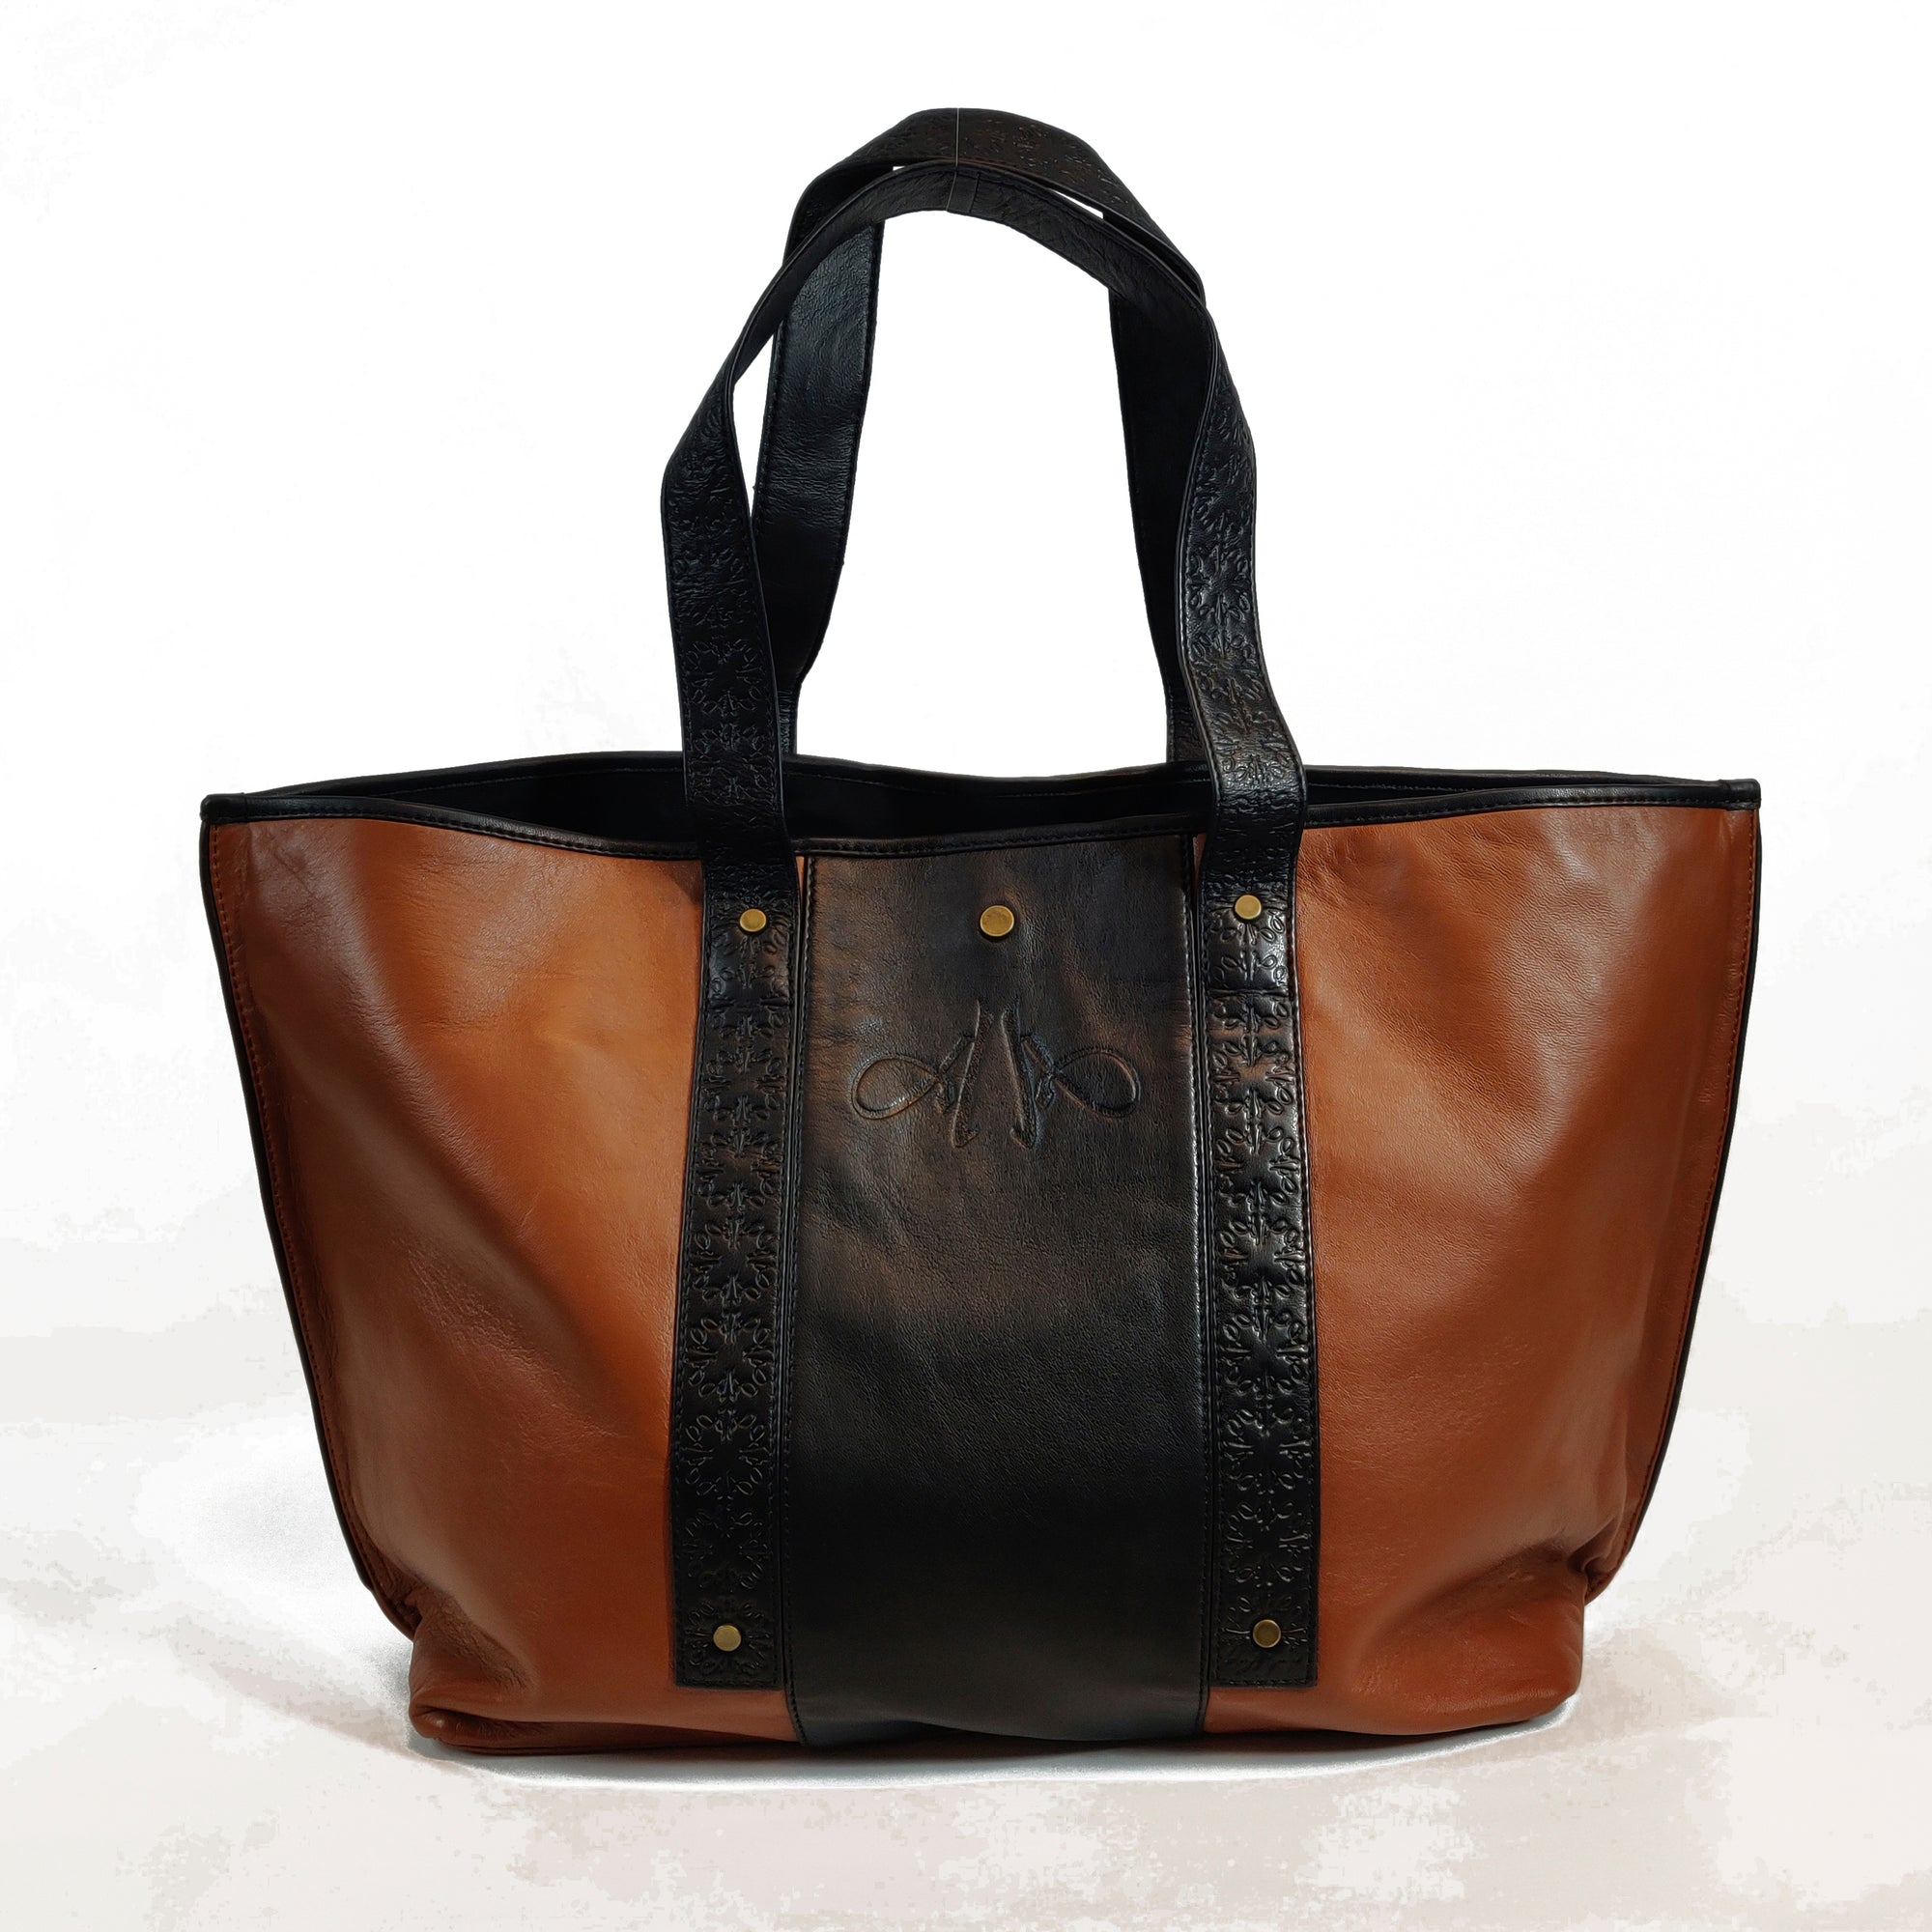 AndreA - "All In" Tote bag